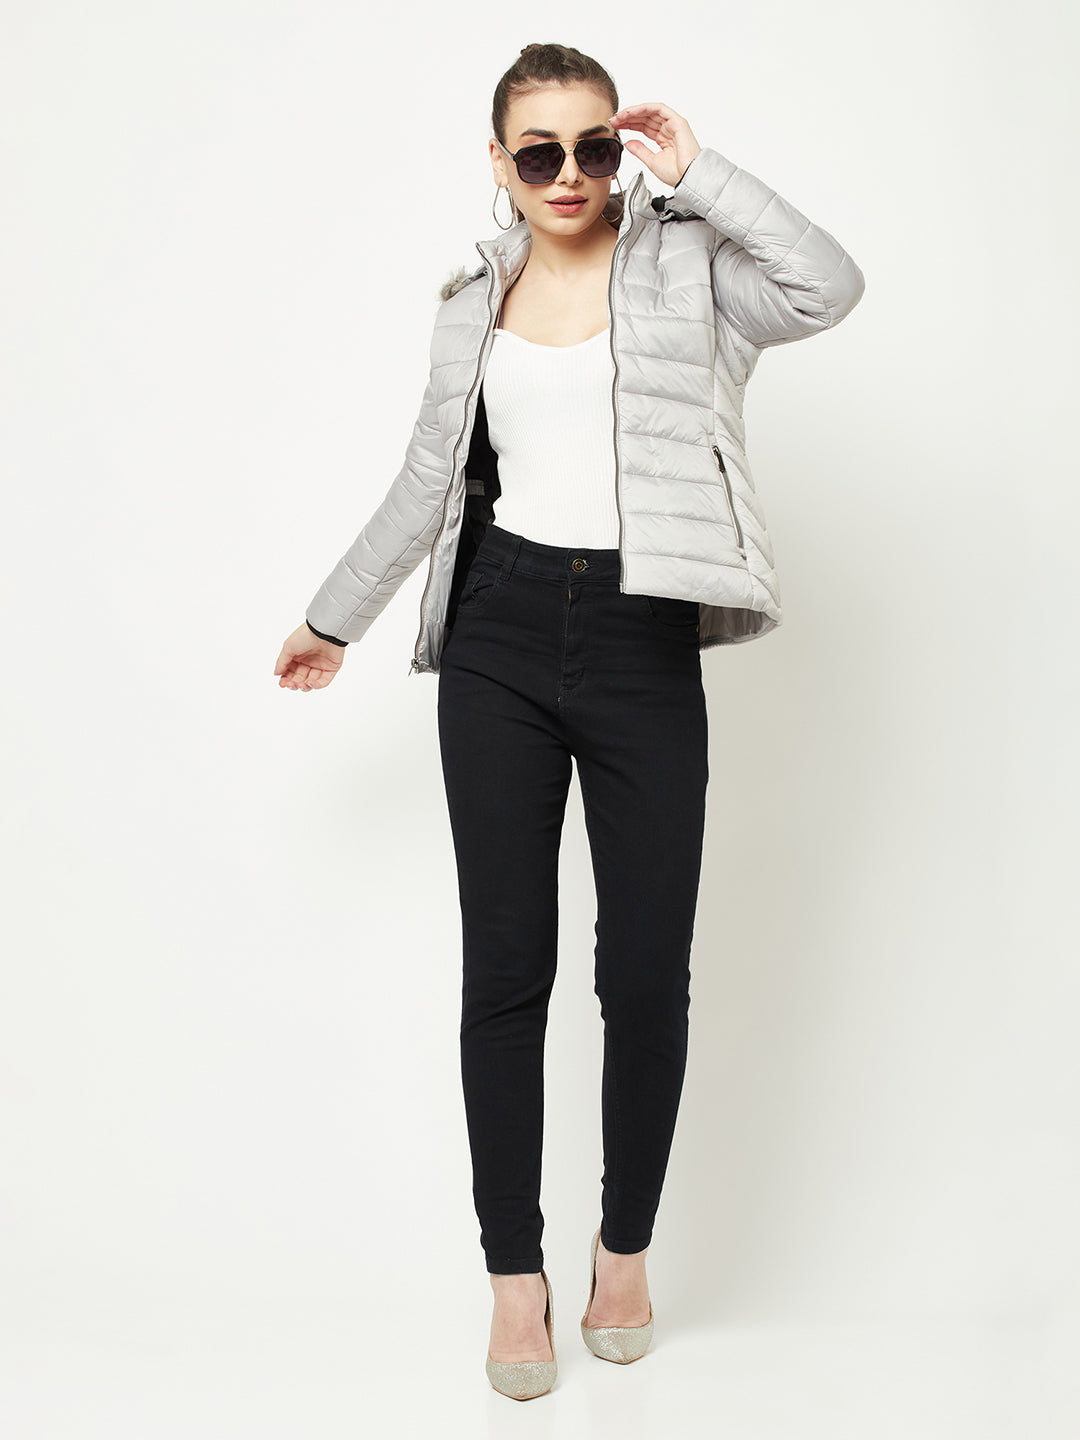   Silver Padded Jacket